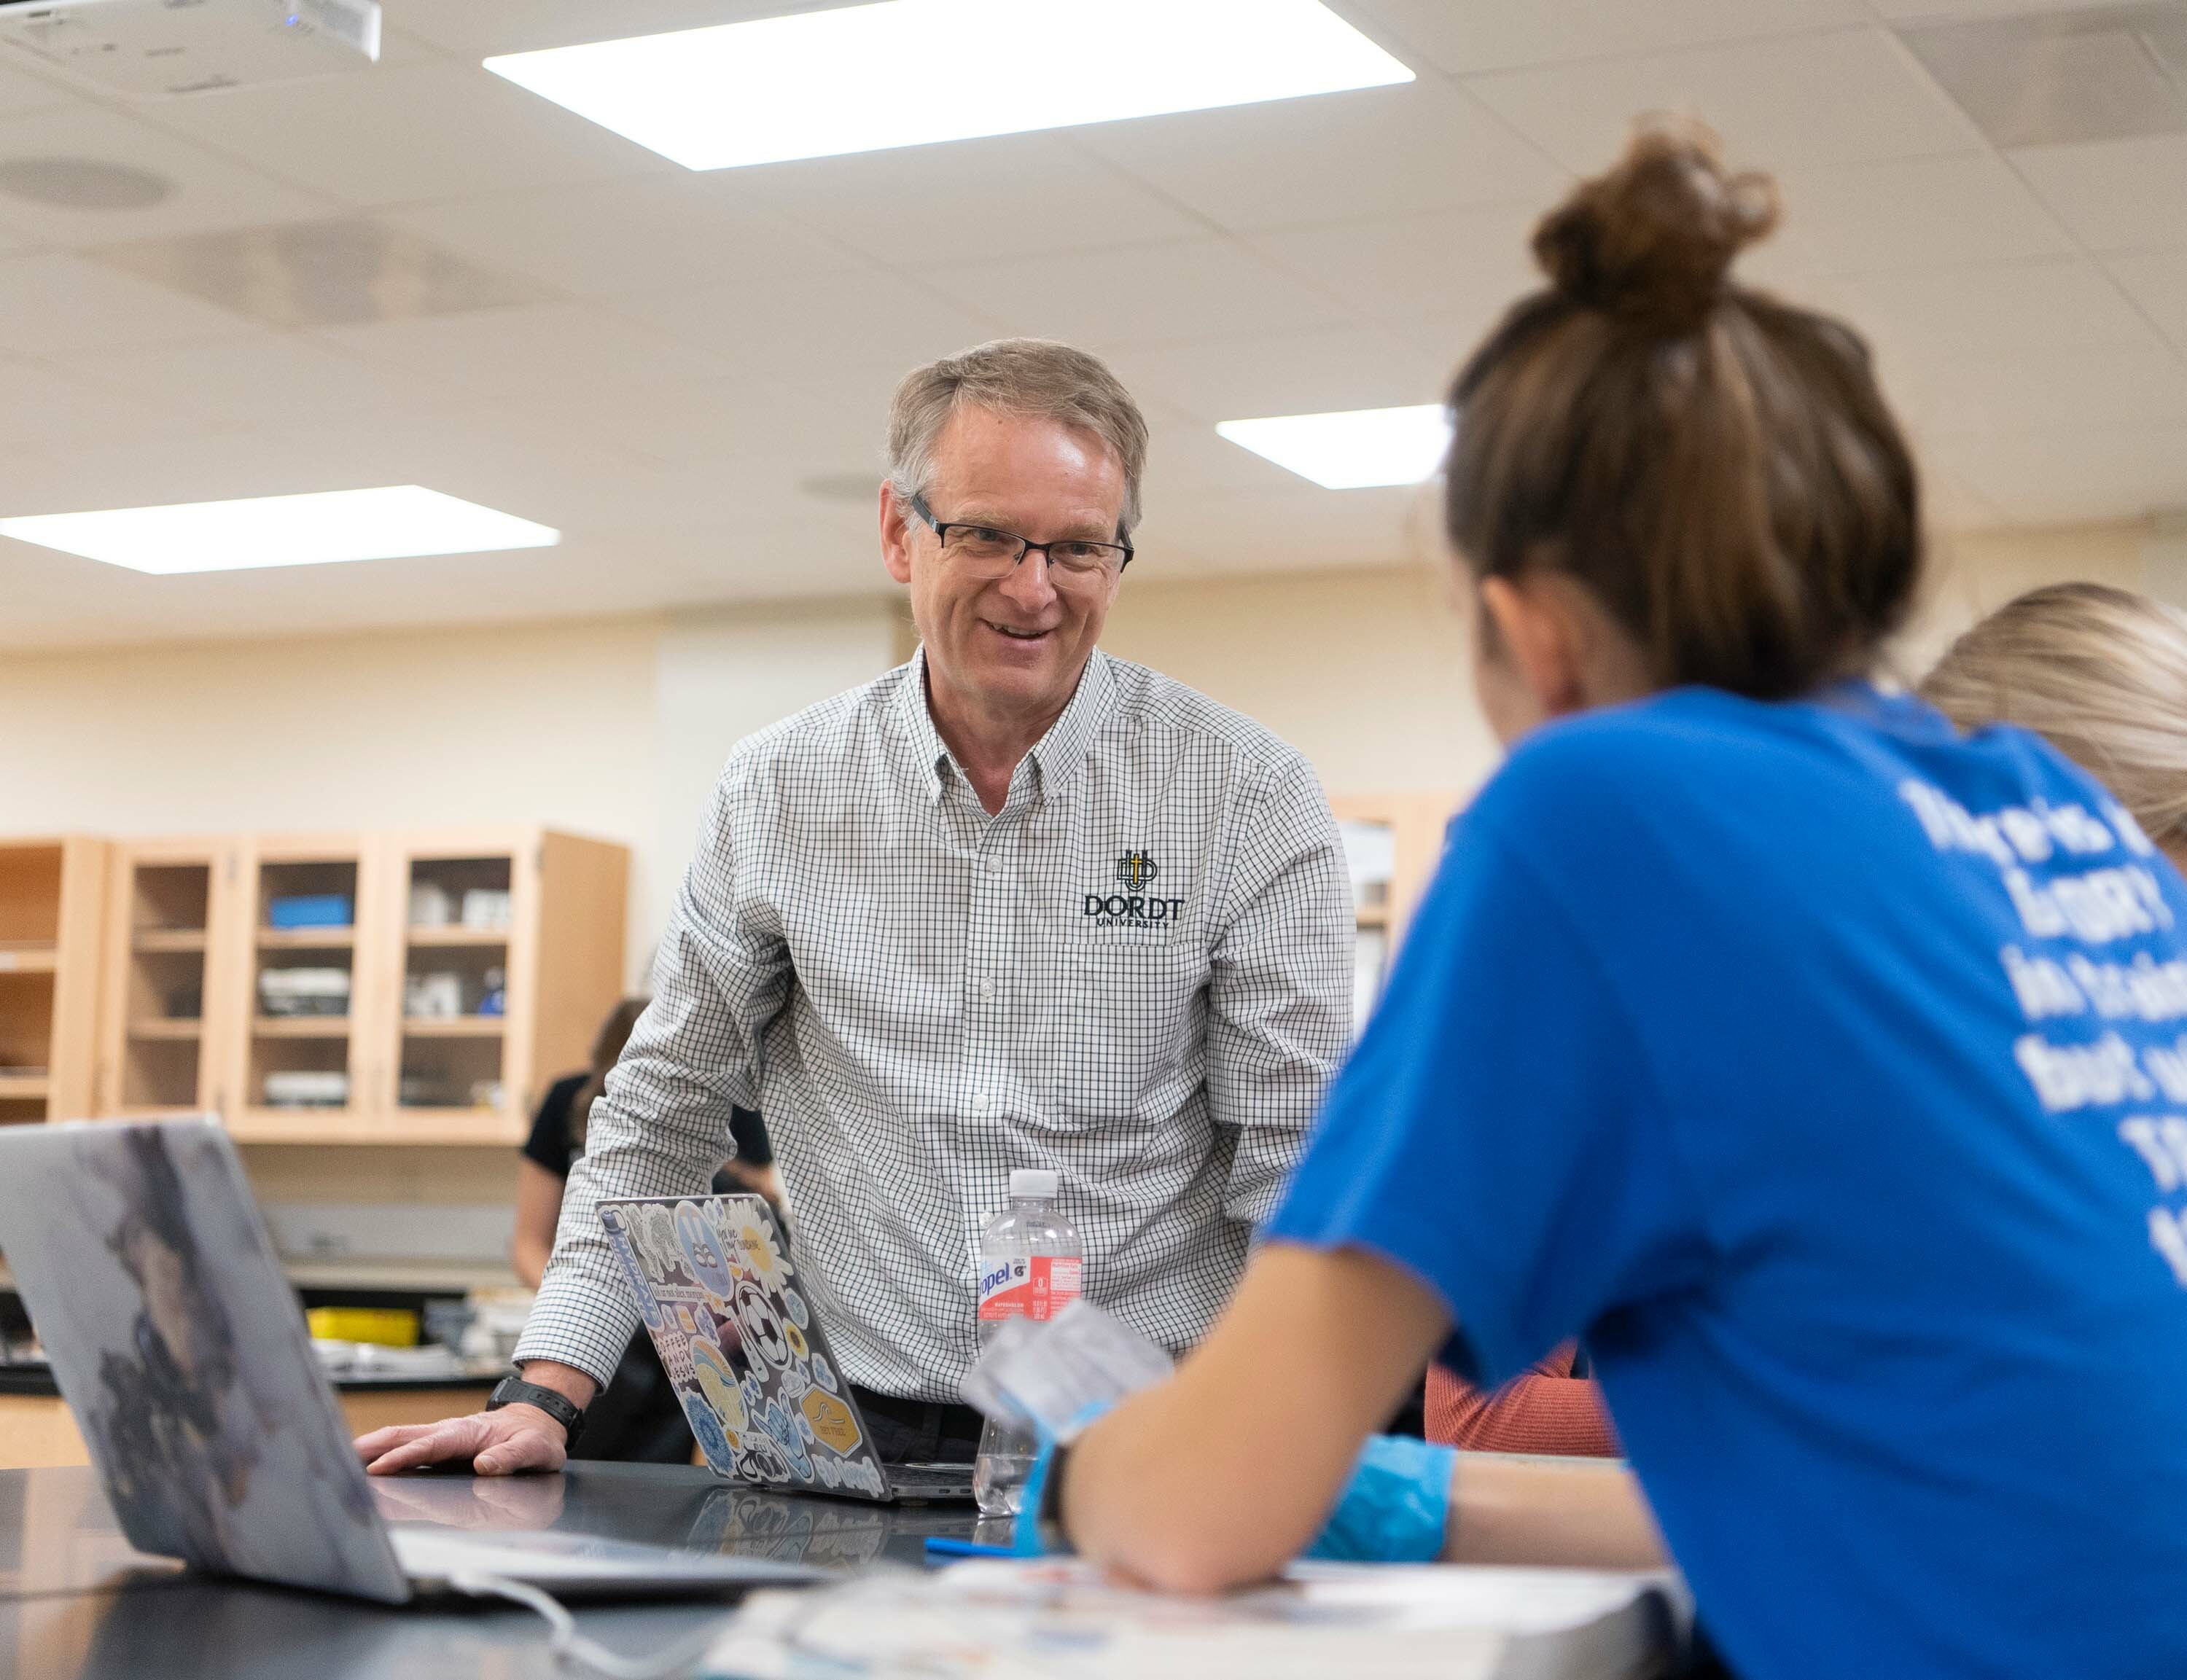 Dr. Jelsma interacts with a couple students during a lab